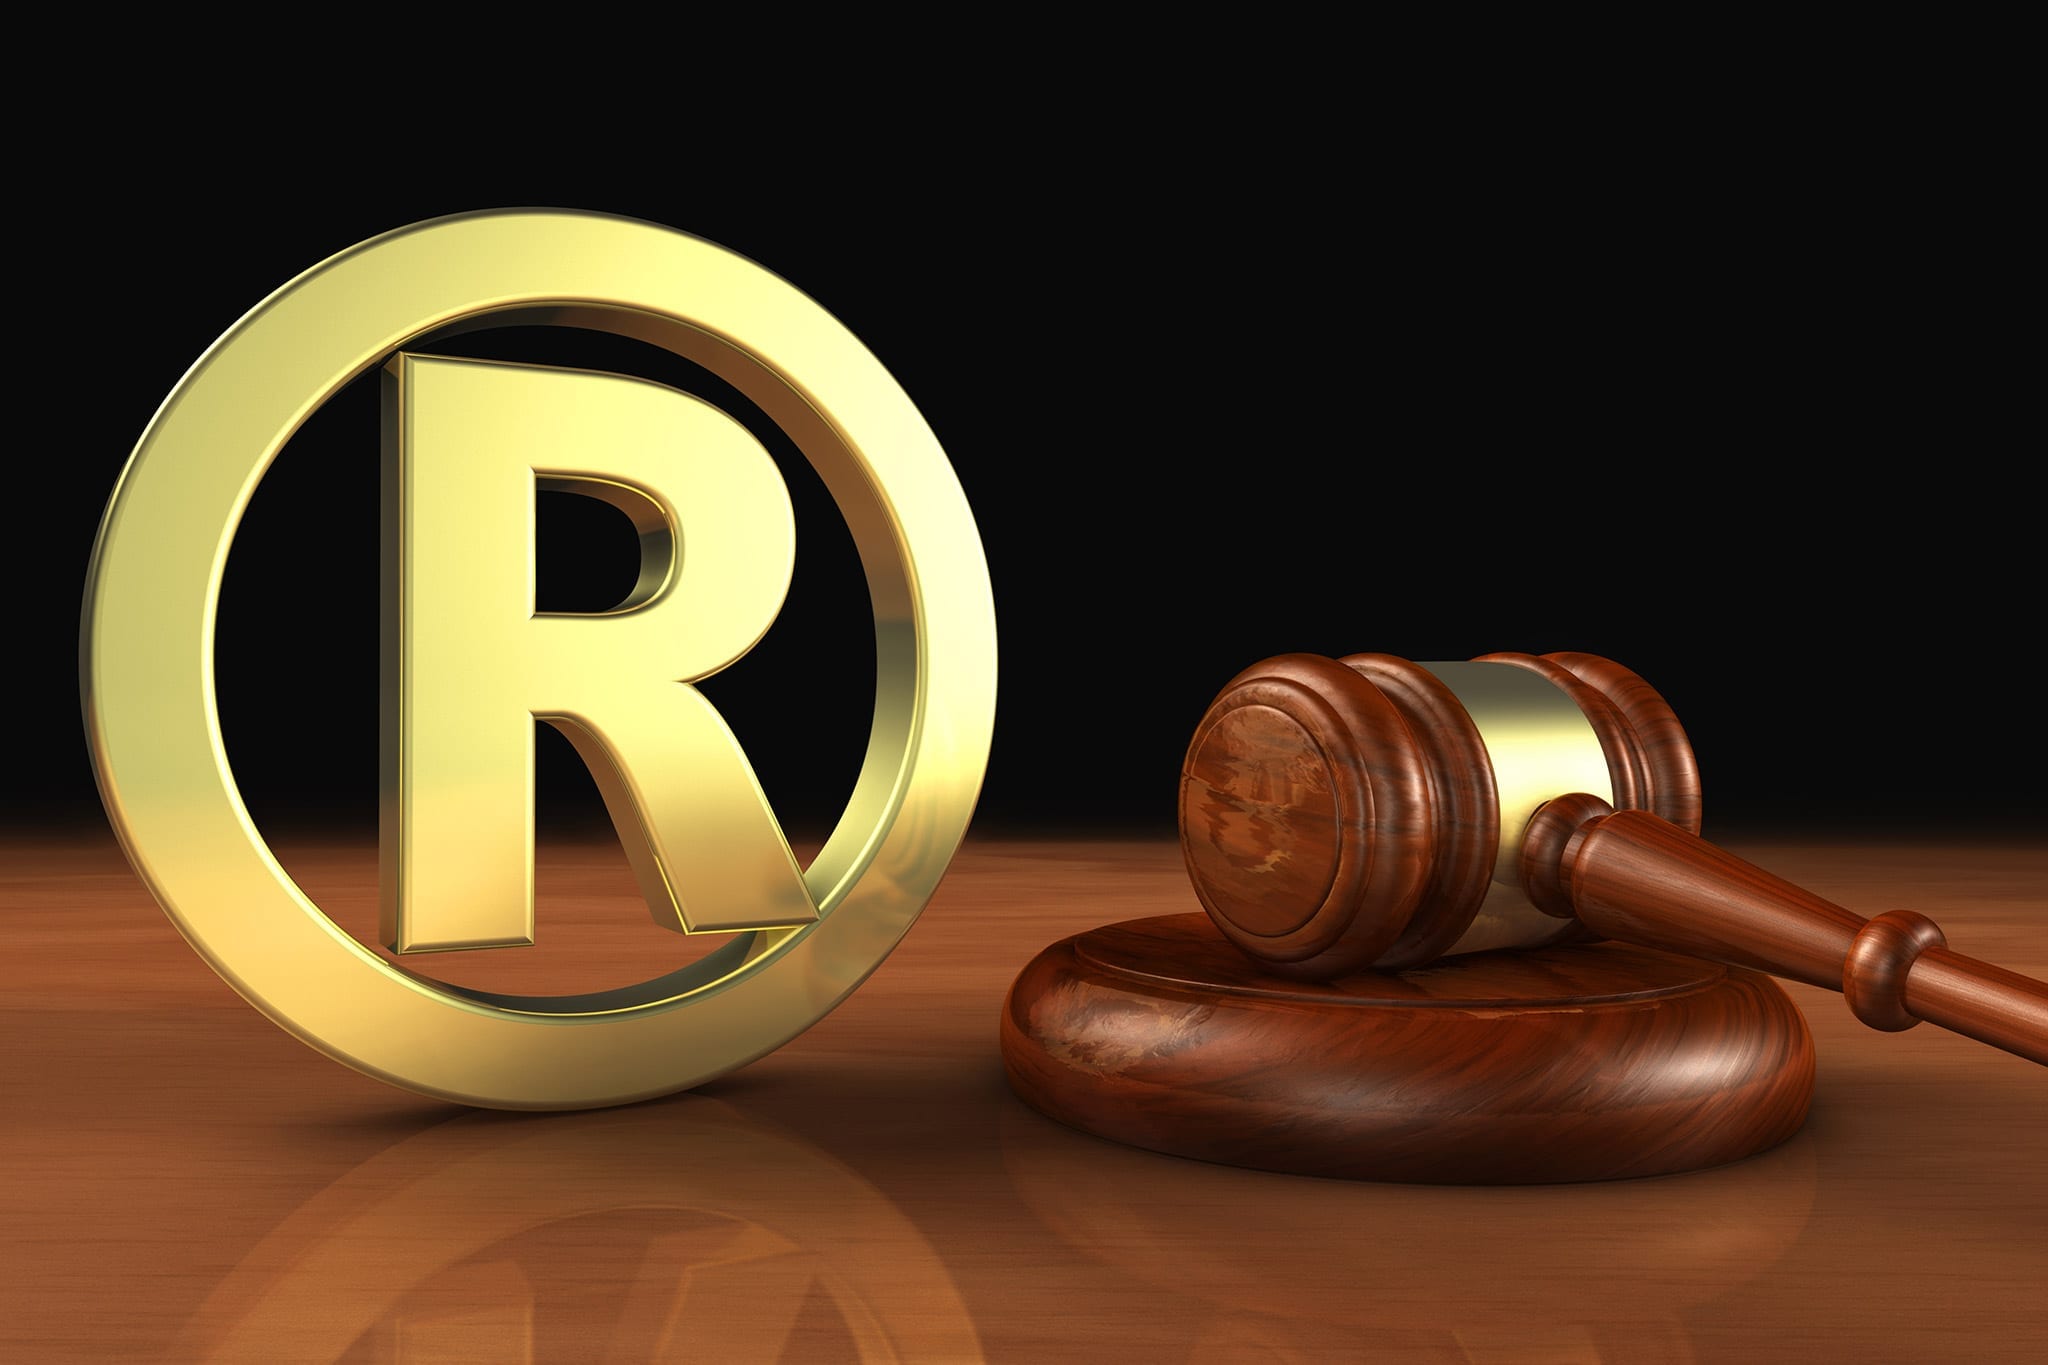 Registered Trademark Symbol: How to Share Yours with the World